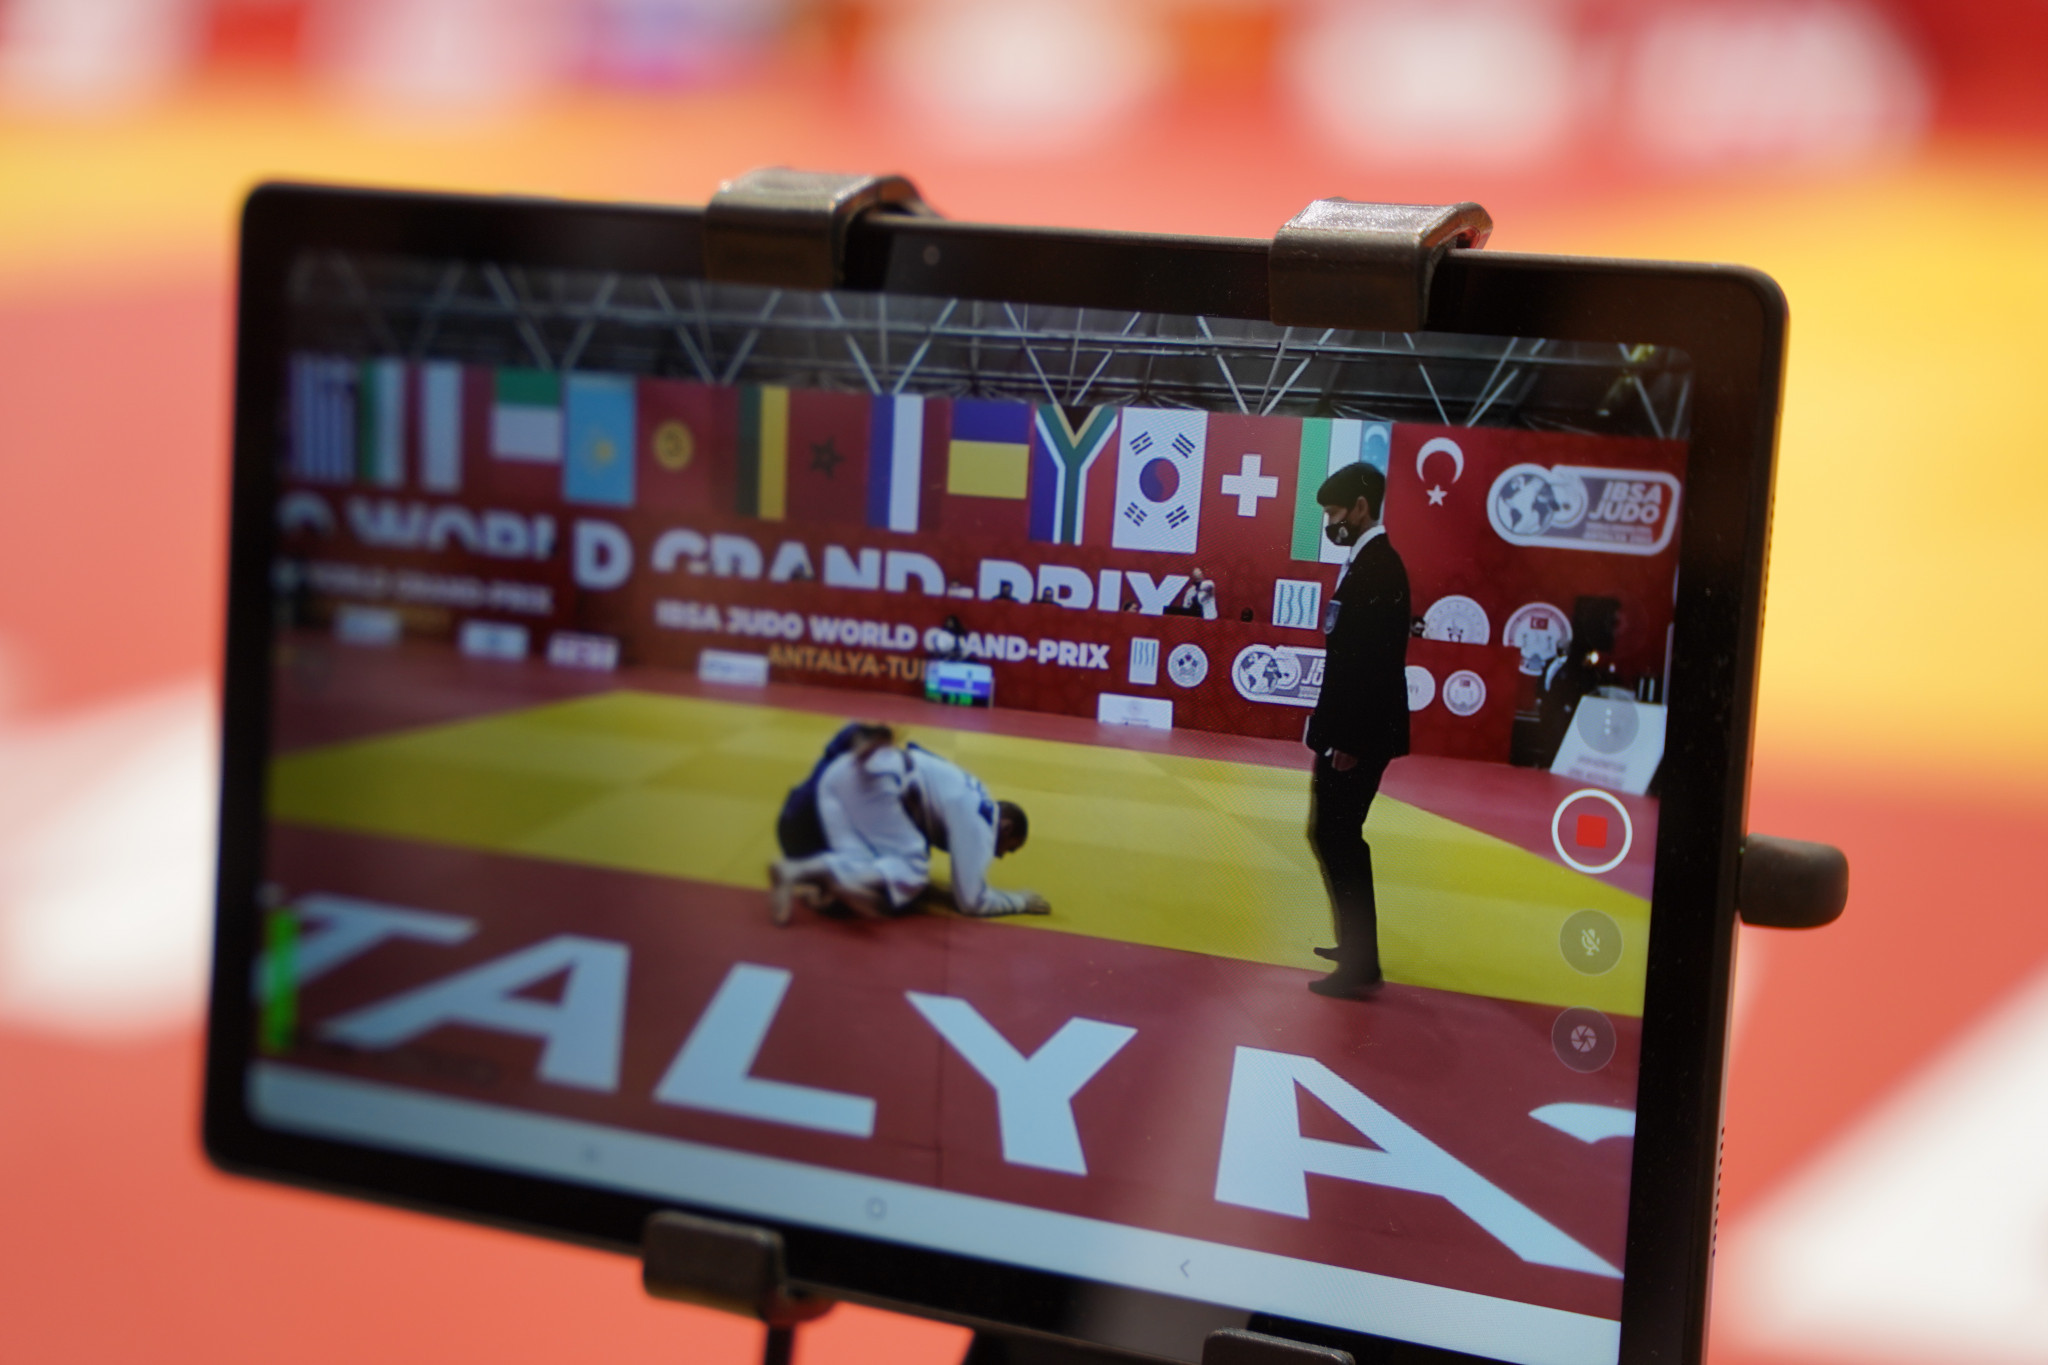 The IBSA Judo Grand Prix in Antalya is the first being staged under the new classification system ©IBSA Judo Grand Prix Antalya